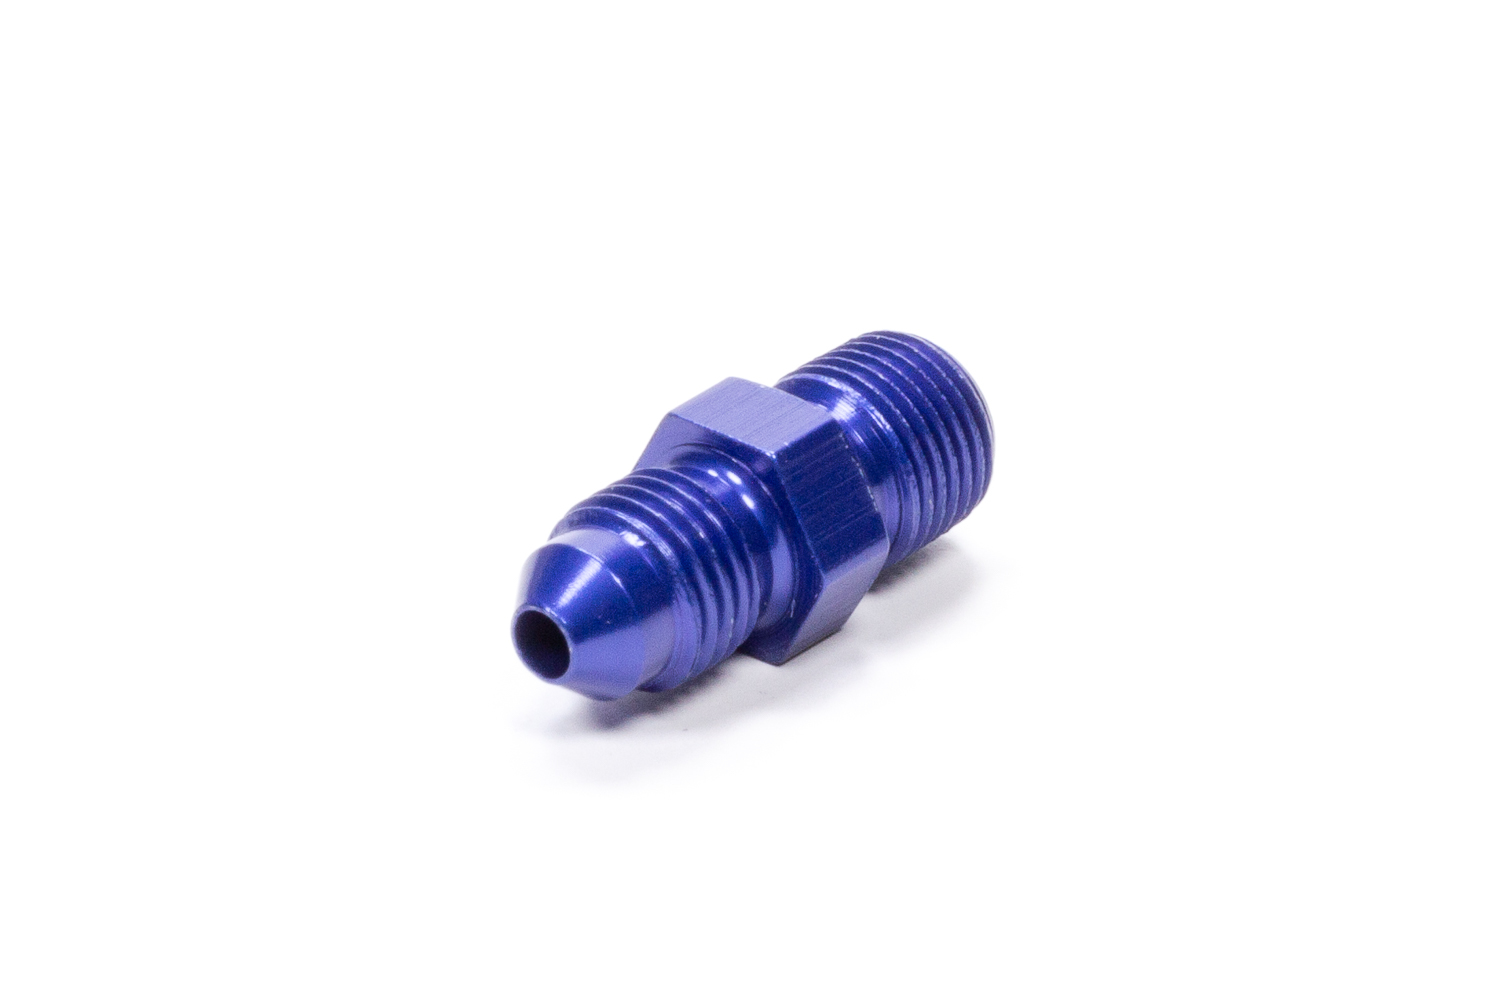 Fragola 481604 - Straight Adapter Fitting #4 x 1/8 MPT